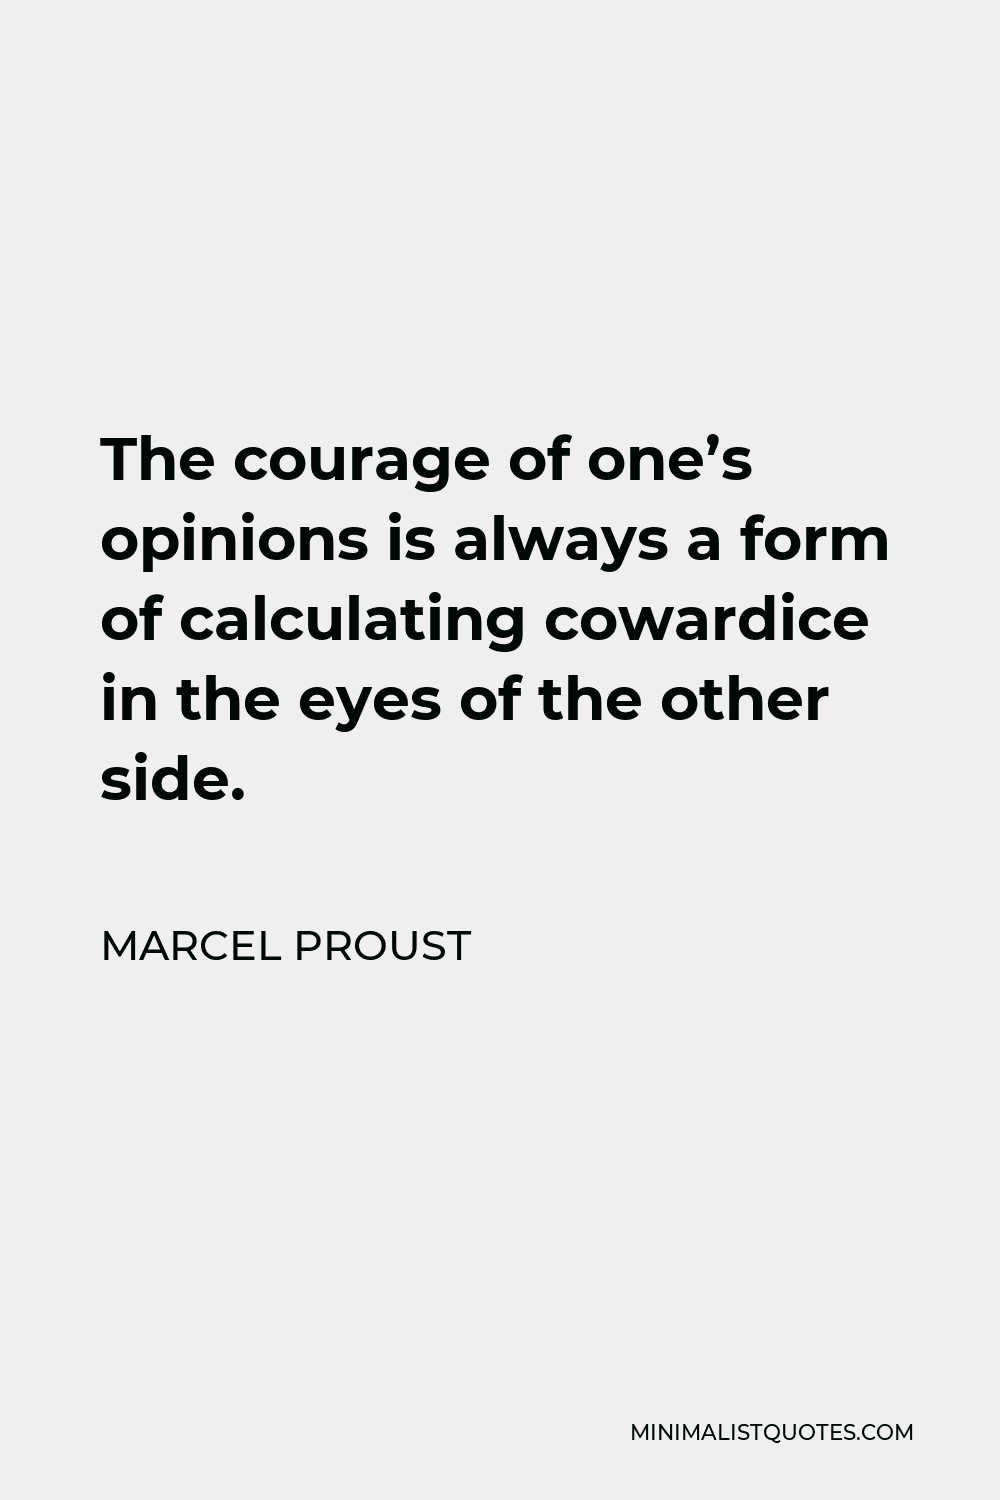 Marcel Proust Quote - The courage of one’s opinions is always a form of calculating cowardice in the eyes of the other side.